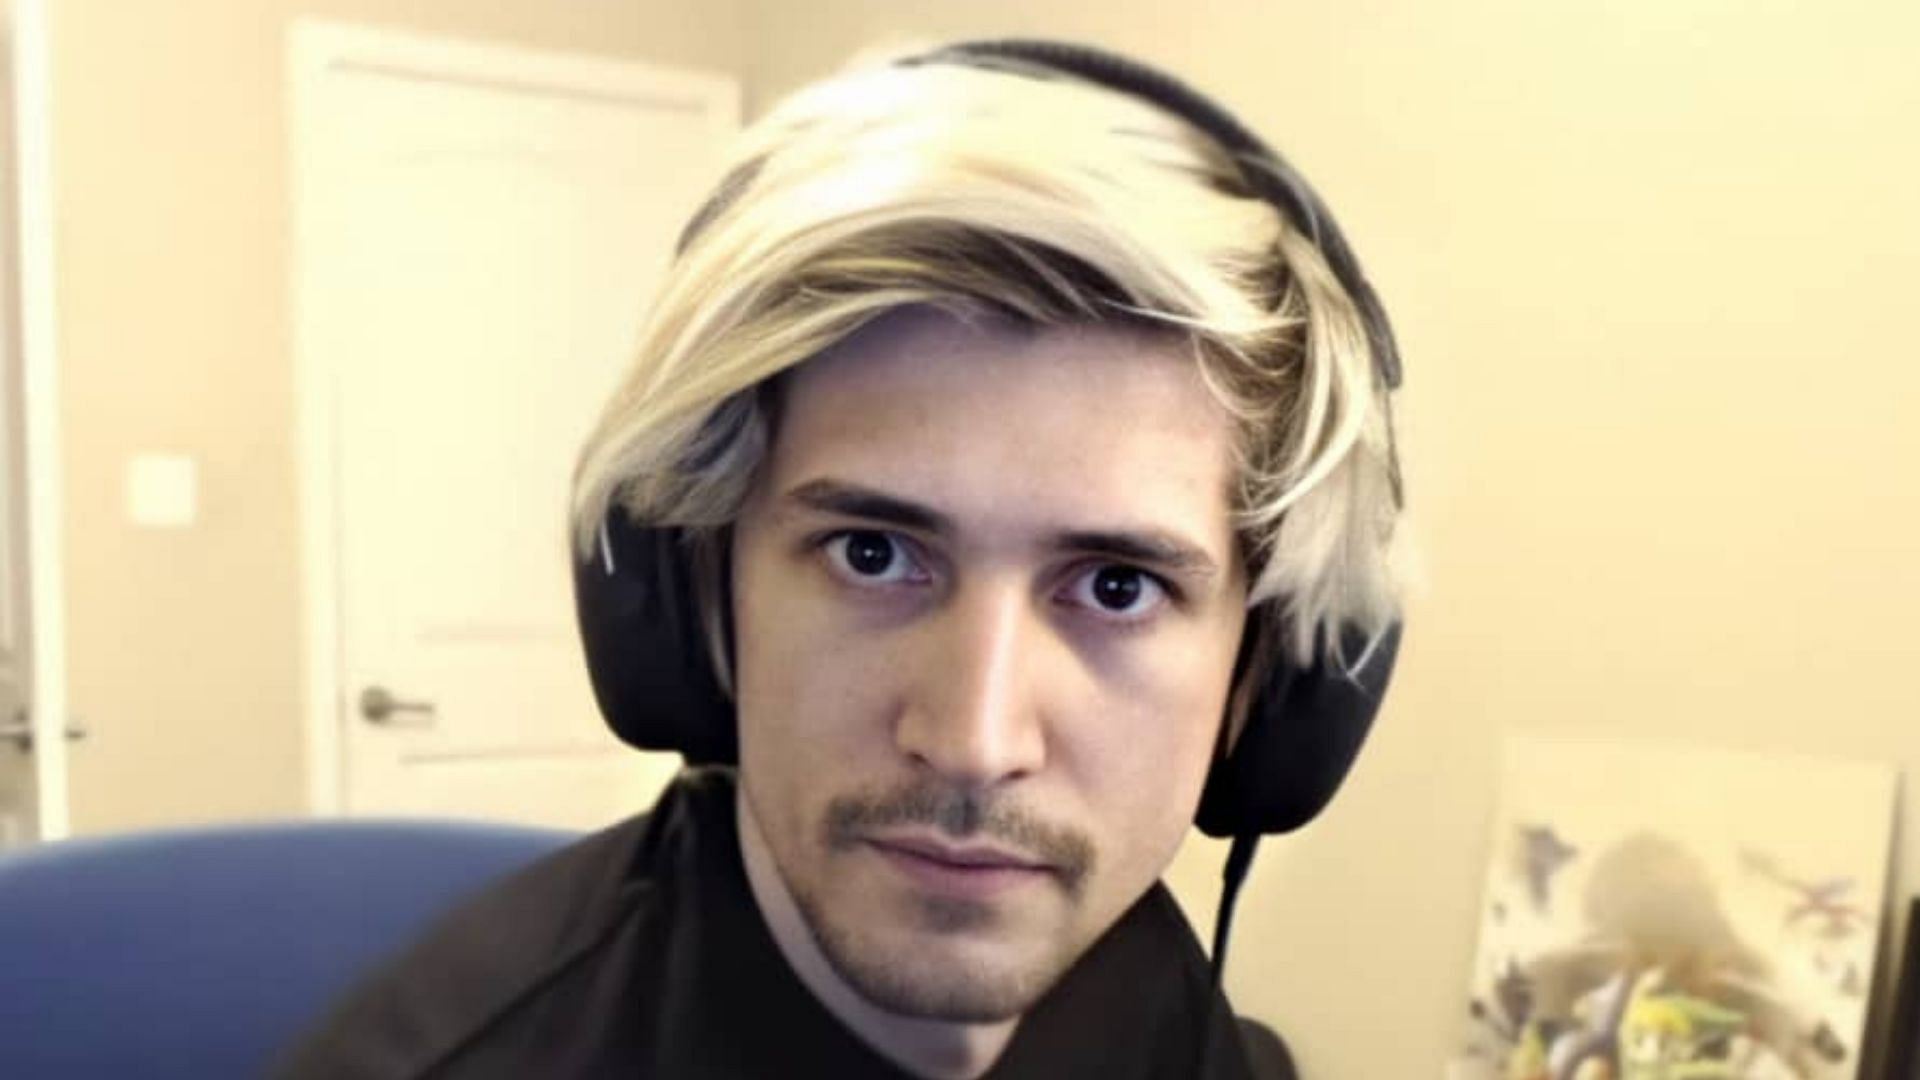 xQc reacts to comments under an article speaking about Tyler1 and other streamers (Image via Top Twitch Streamers)